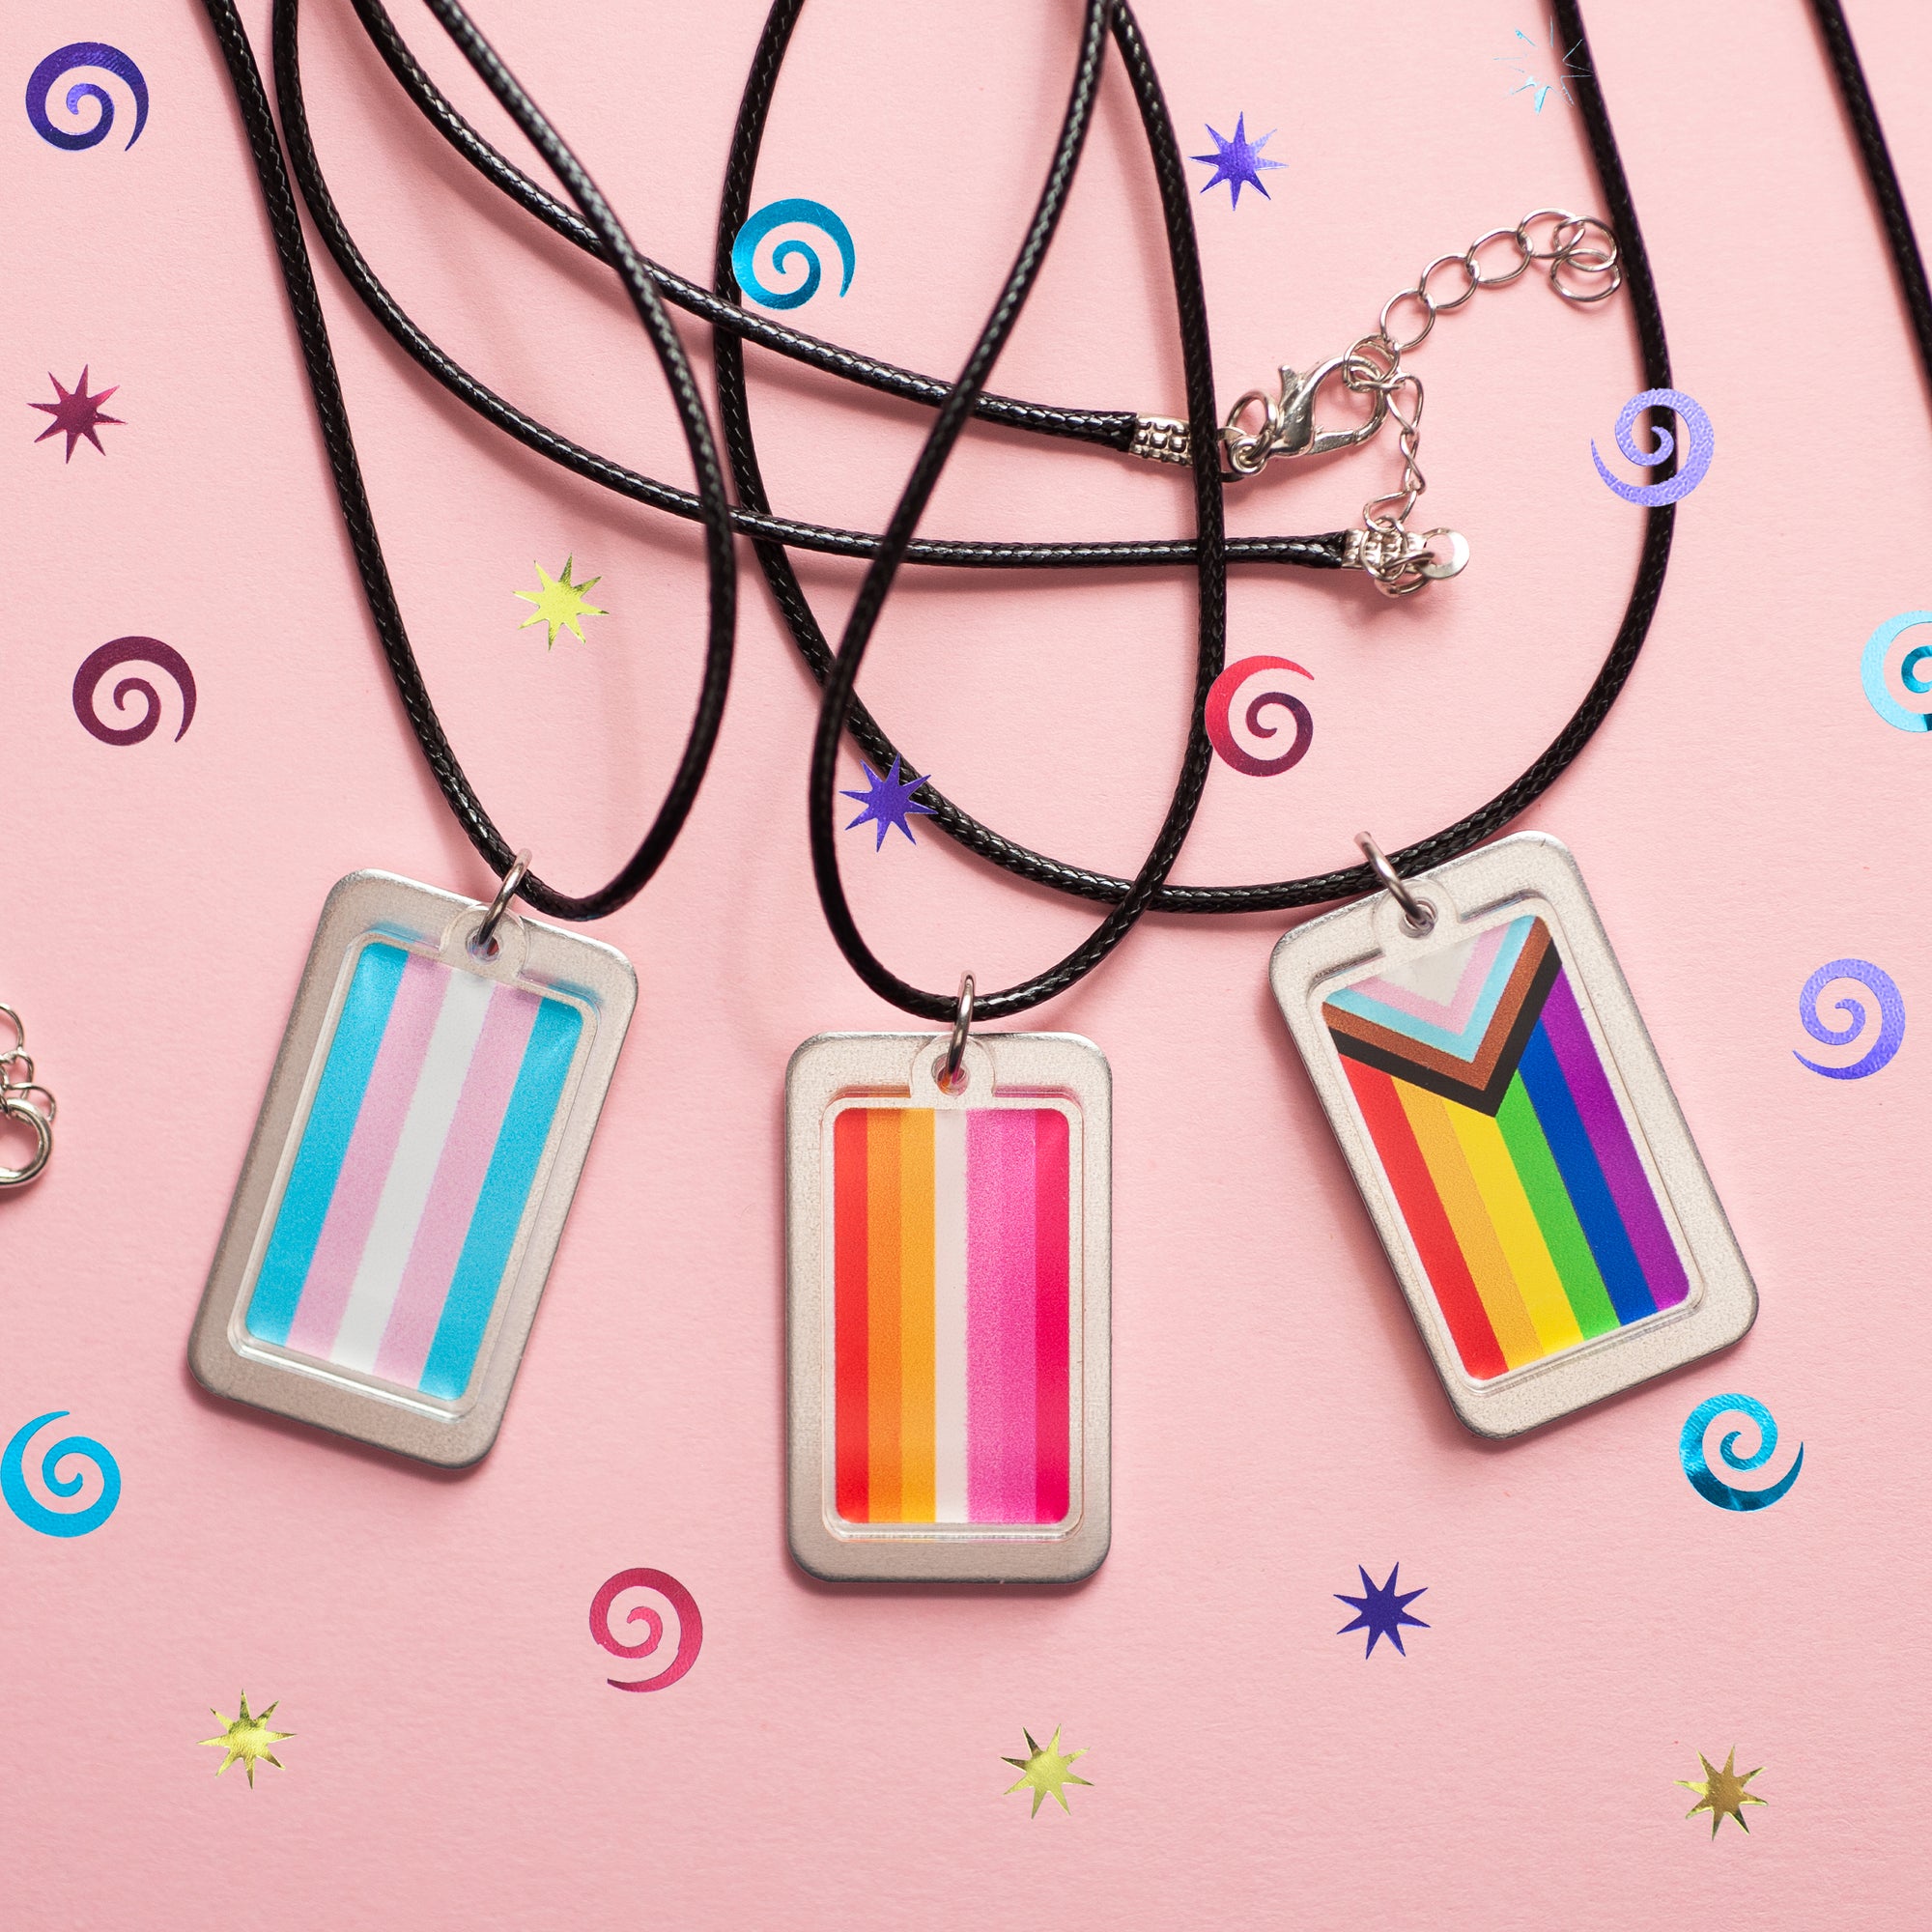 3 pride flag necklaces displayed on a fun background